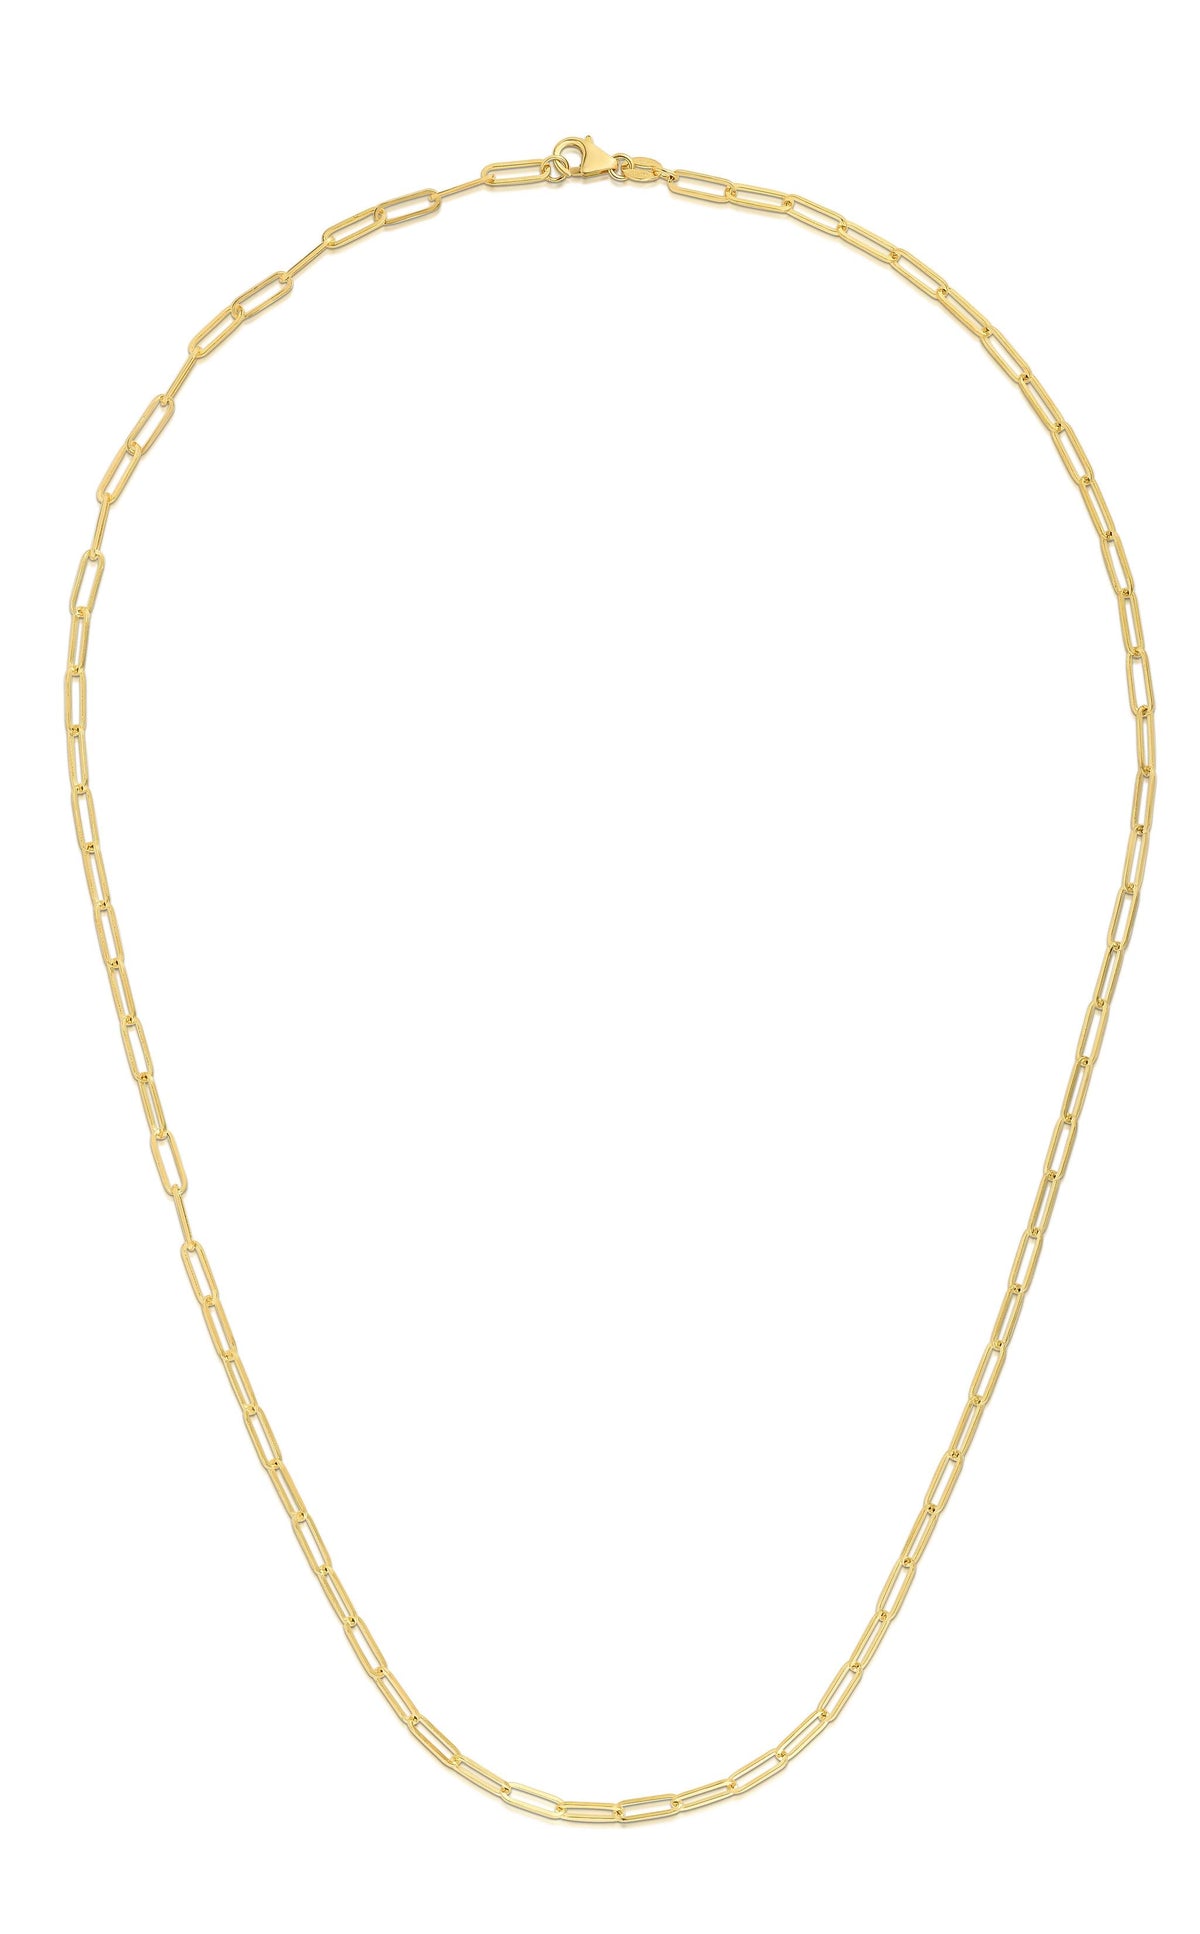 24" 14K Yellow Gold 3.5mm Paperclip Link Necklace